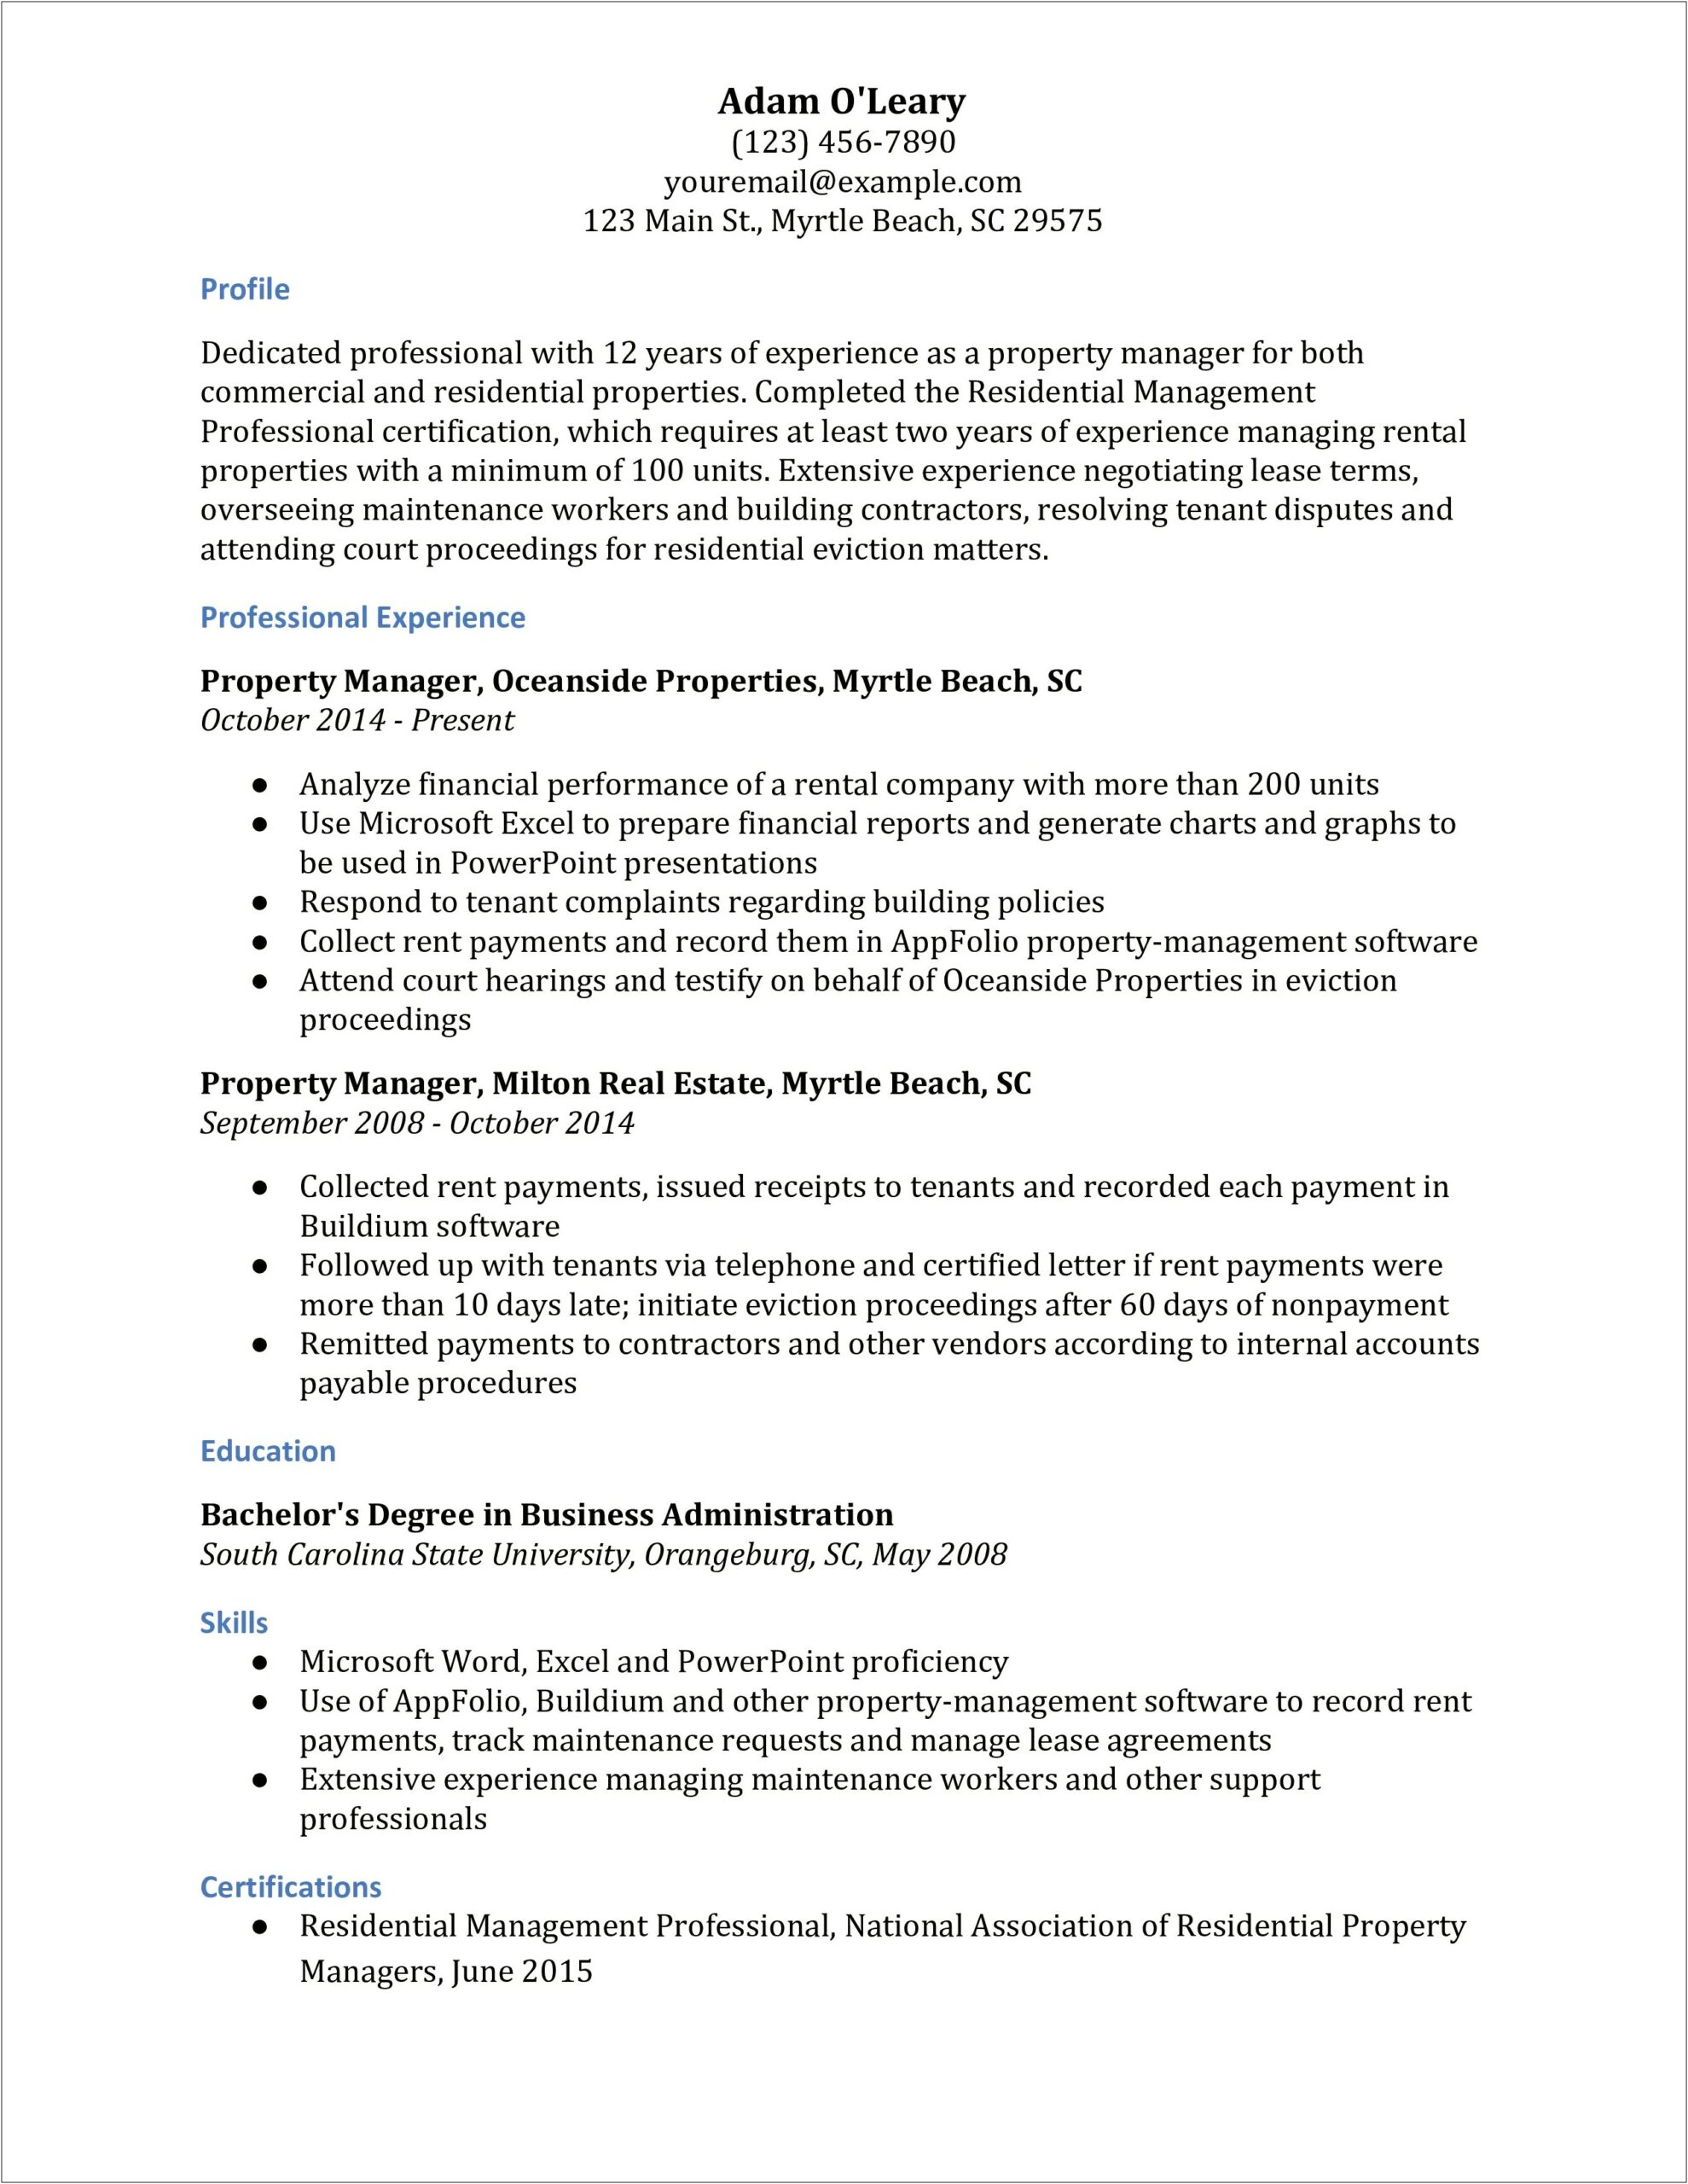 Resume Search For Propery Management Long Island